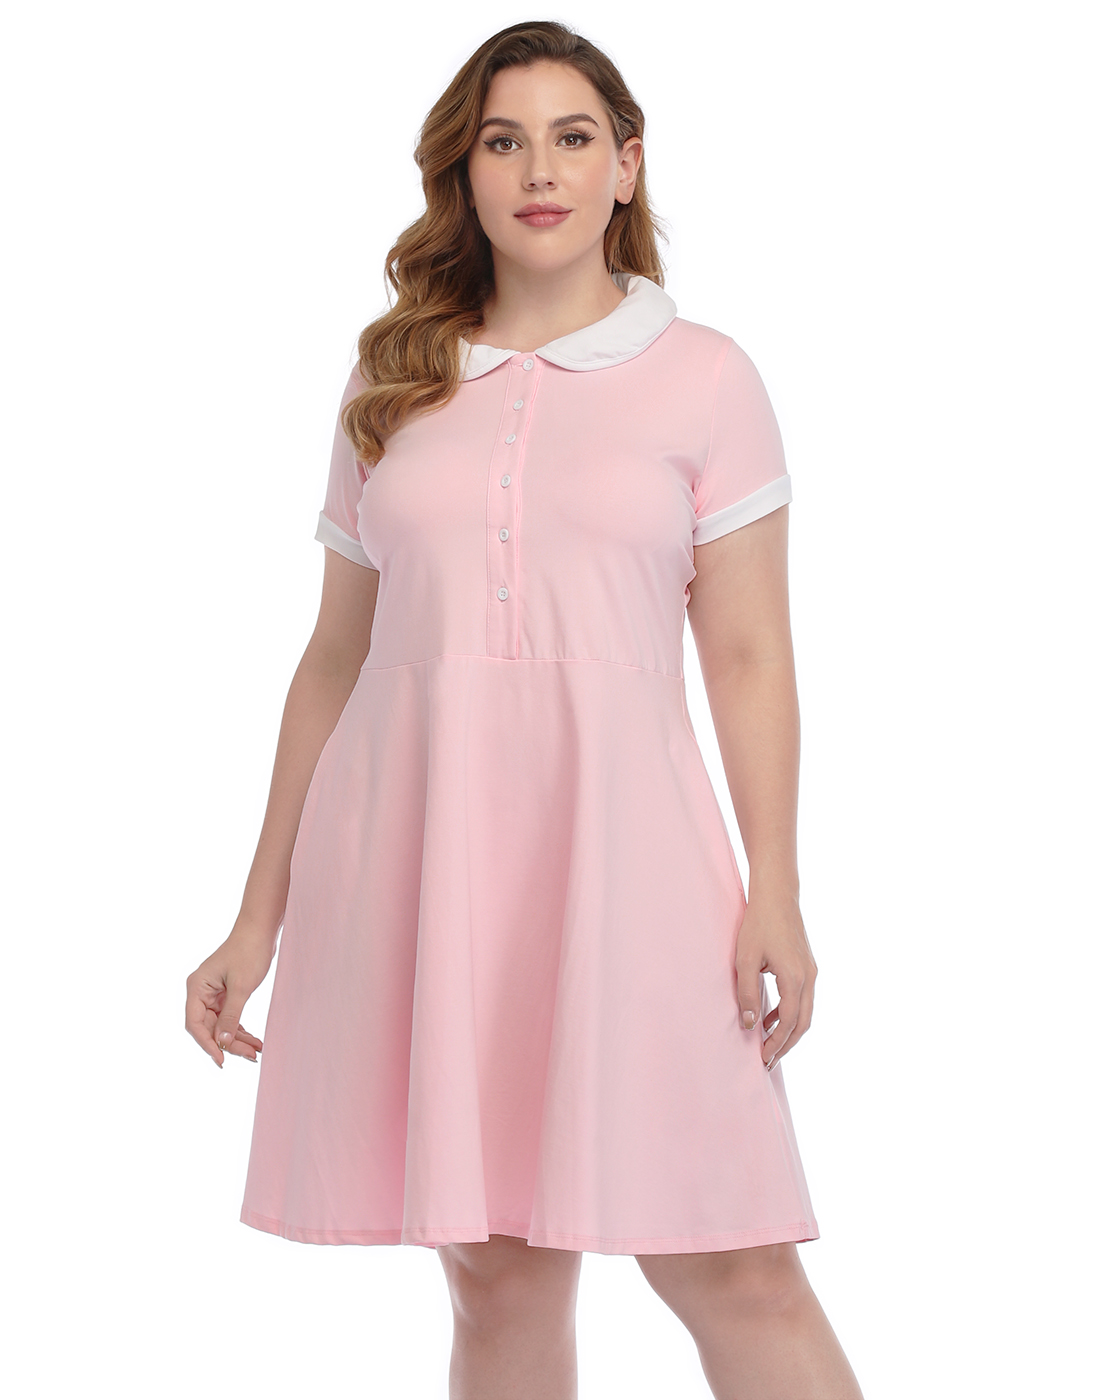 Flare Collared Casual Skater Dress ...